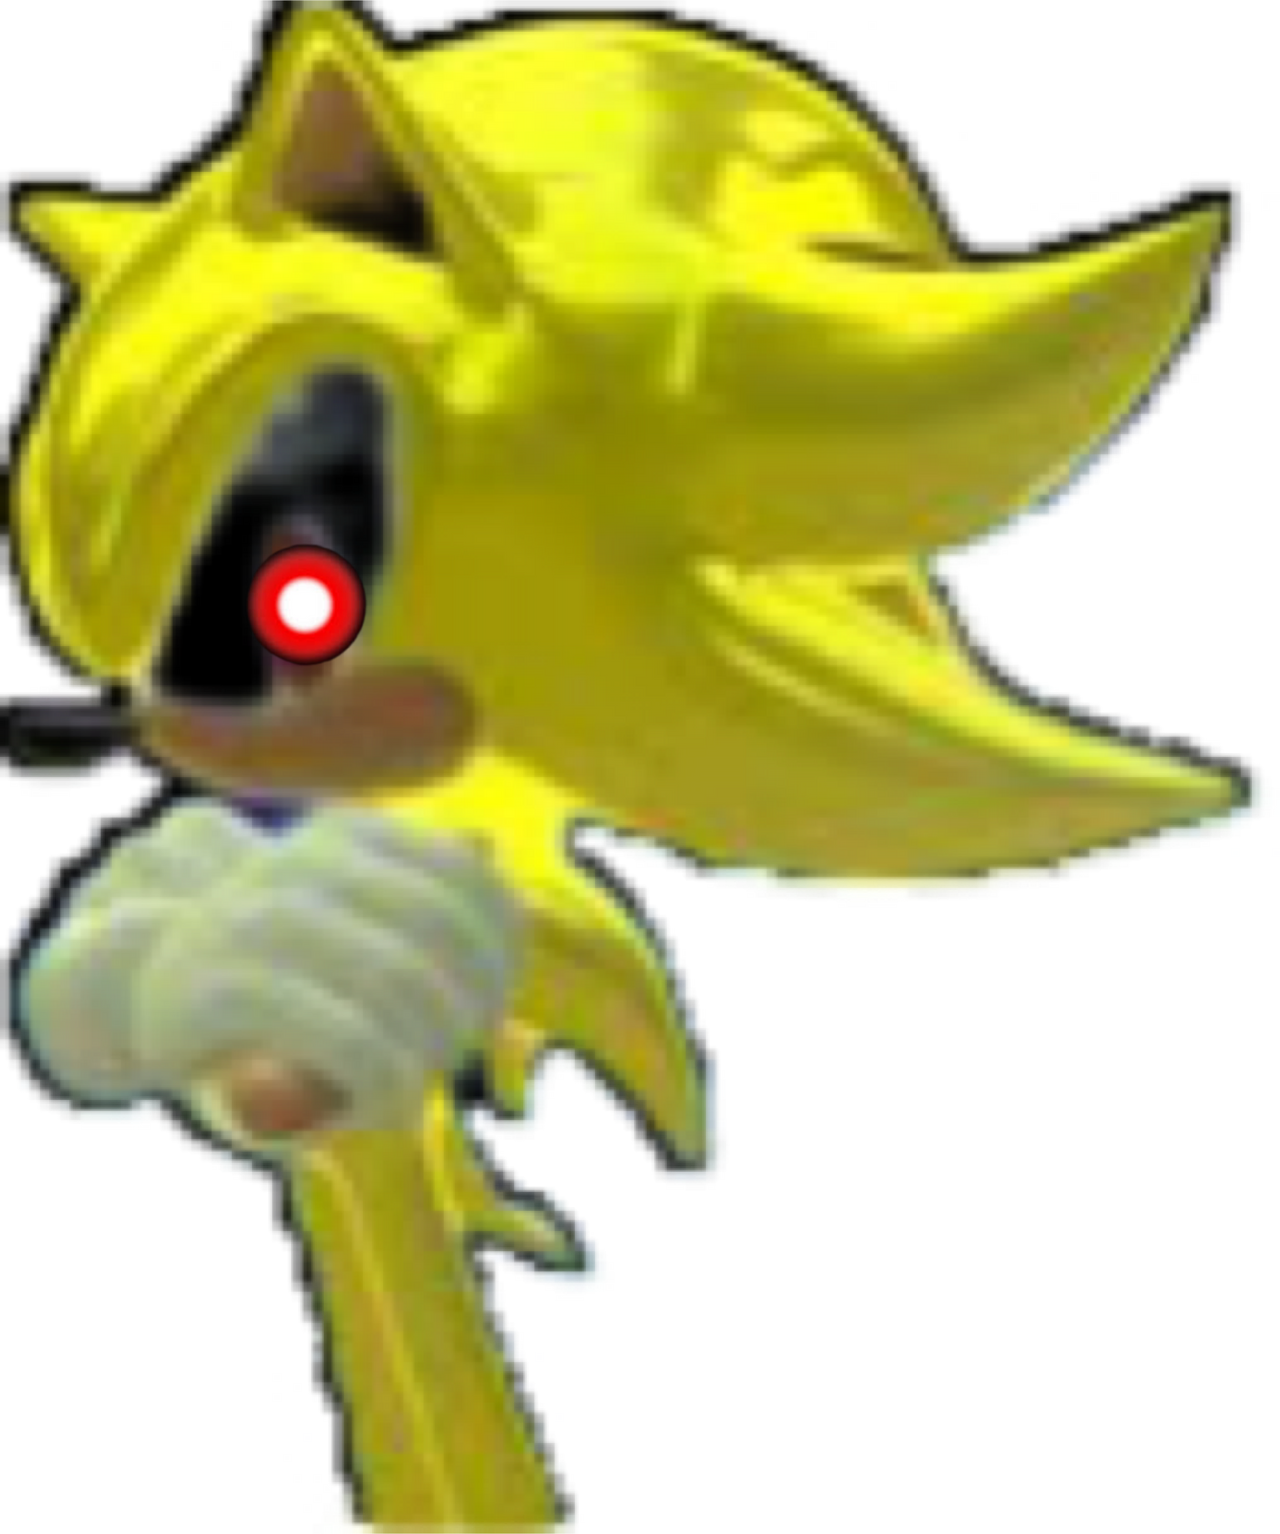 Universe Sonic 2 - Sonic.Exe Unleashed #SuperSonic